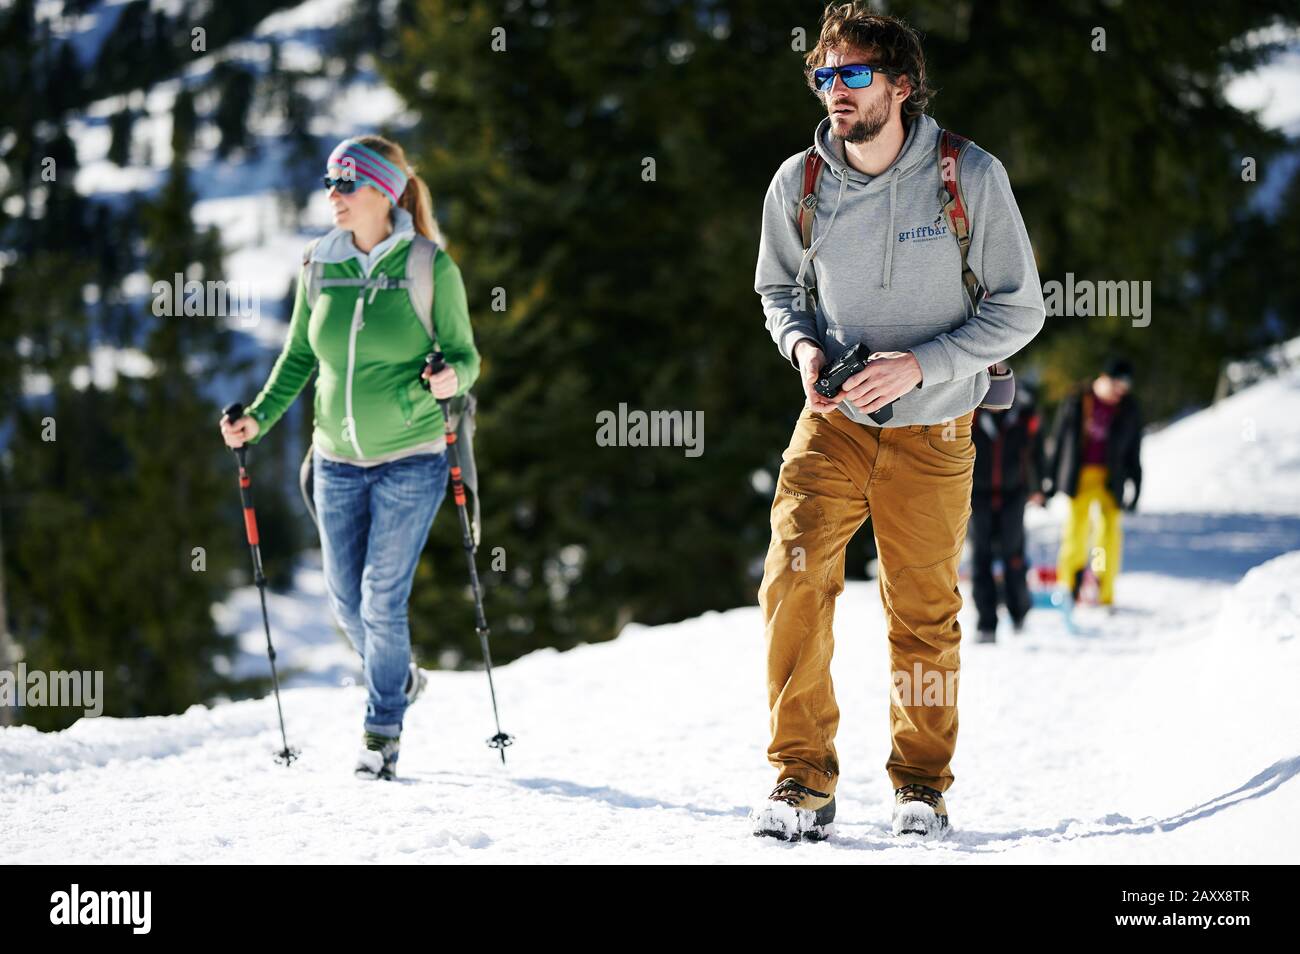 A couple walking outside on snow. Stock Photo